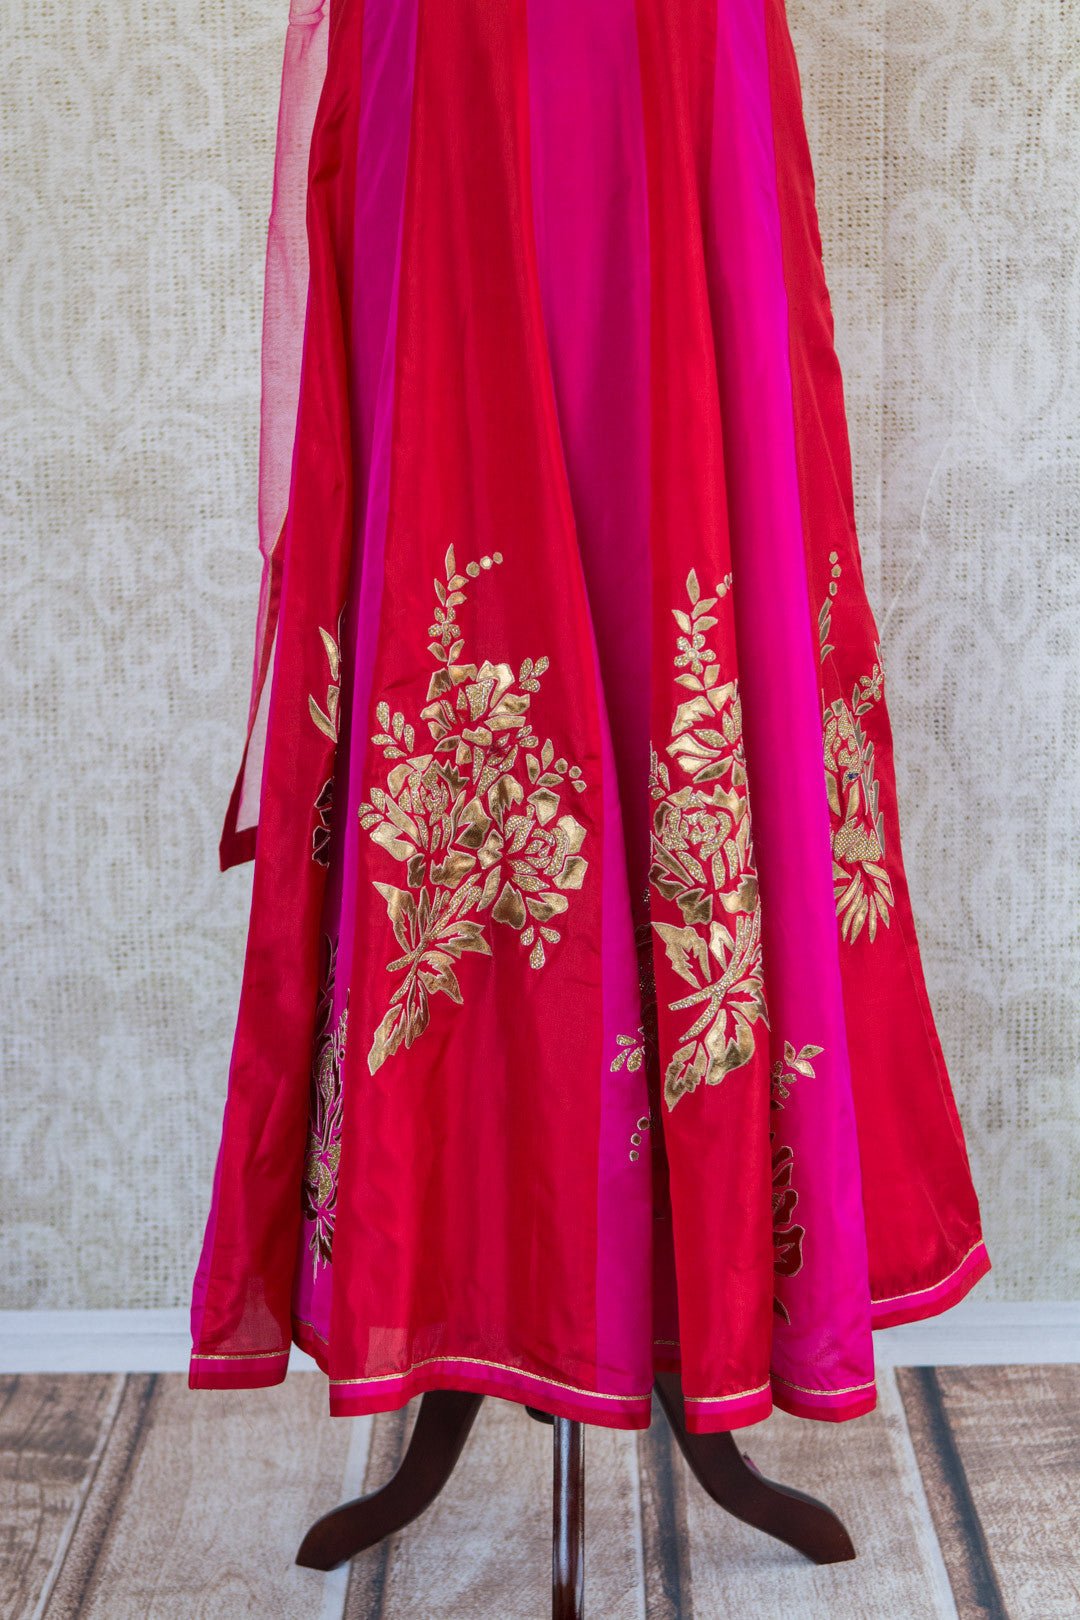 501089-suit-sleeveless-red-fuchsia-striped-suit-elegant-gold-embroidery-scarf-skirt-view